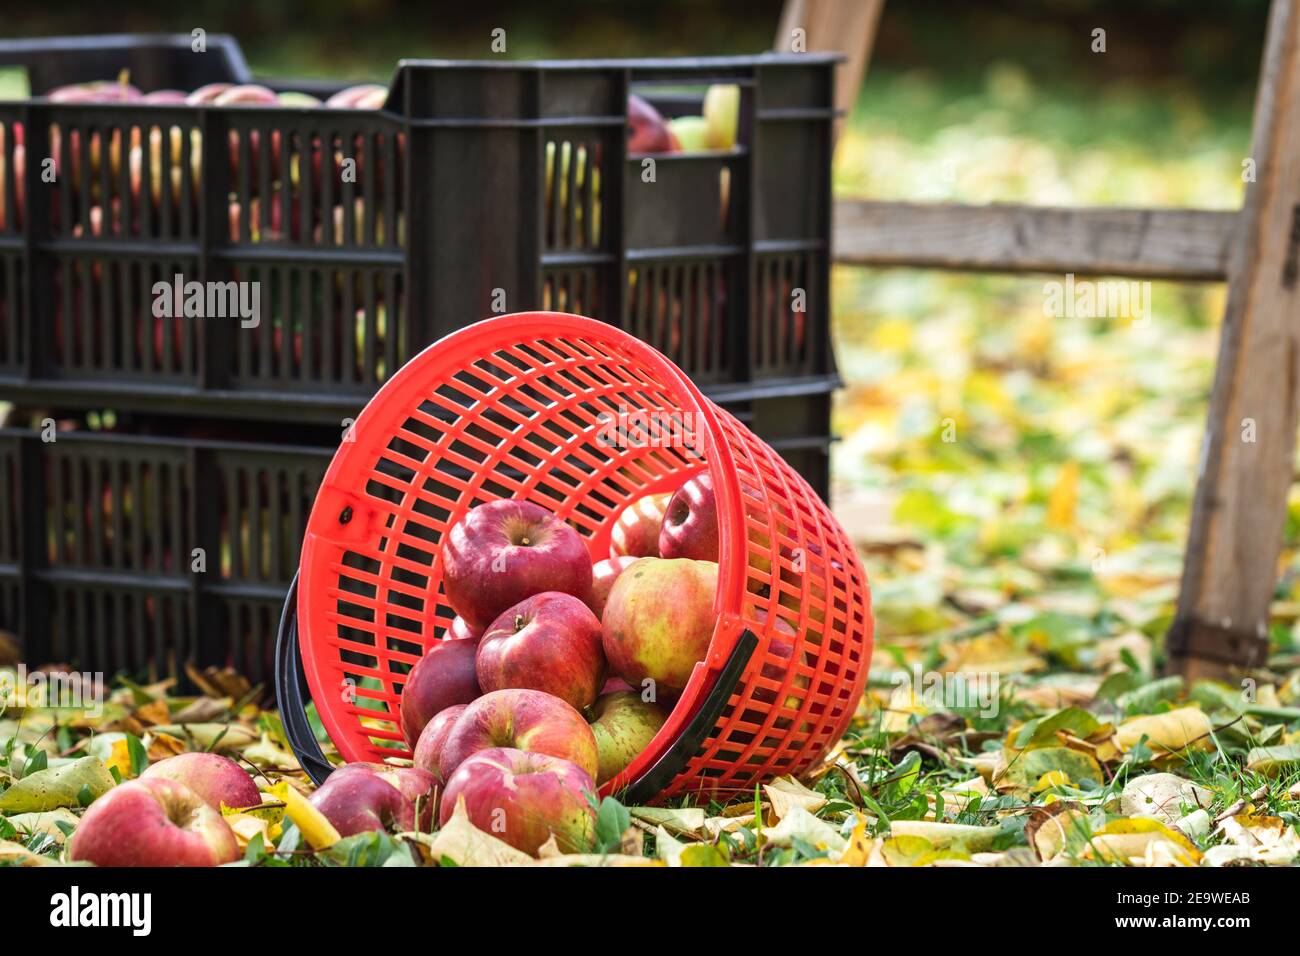 https://c8.alamy.com/comp/2E9WEAB/autumn-harvest-in-garden-harvesting-apple-fruit-plastic-crate-and-basket-wooden-ladder-in-orchard-homegrown-produce-of-red-apples-2E9WEAB.jpg